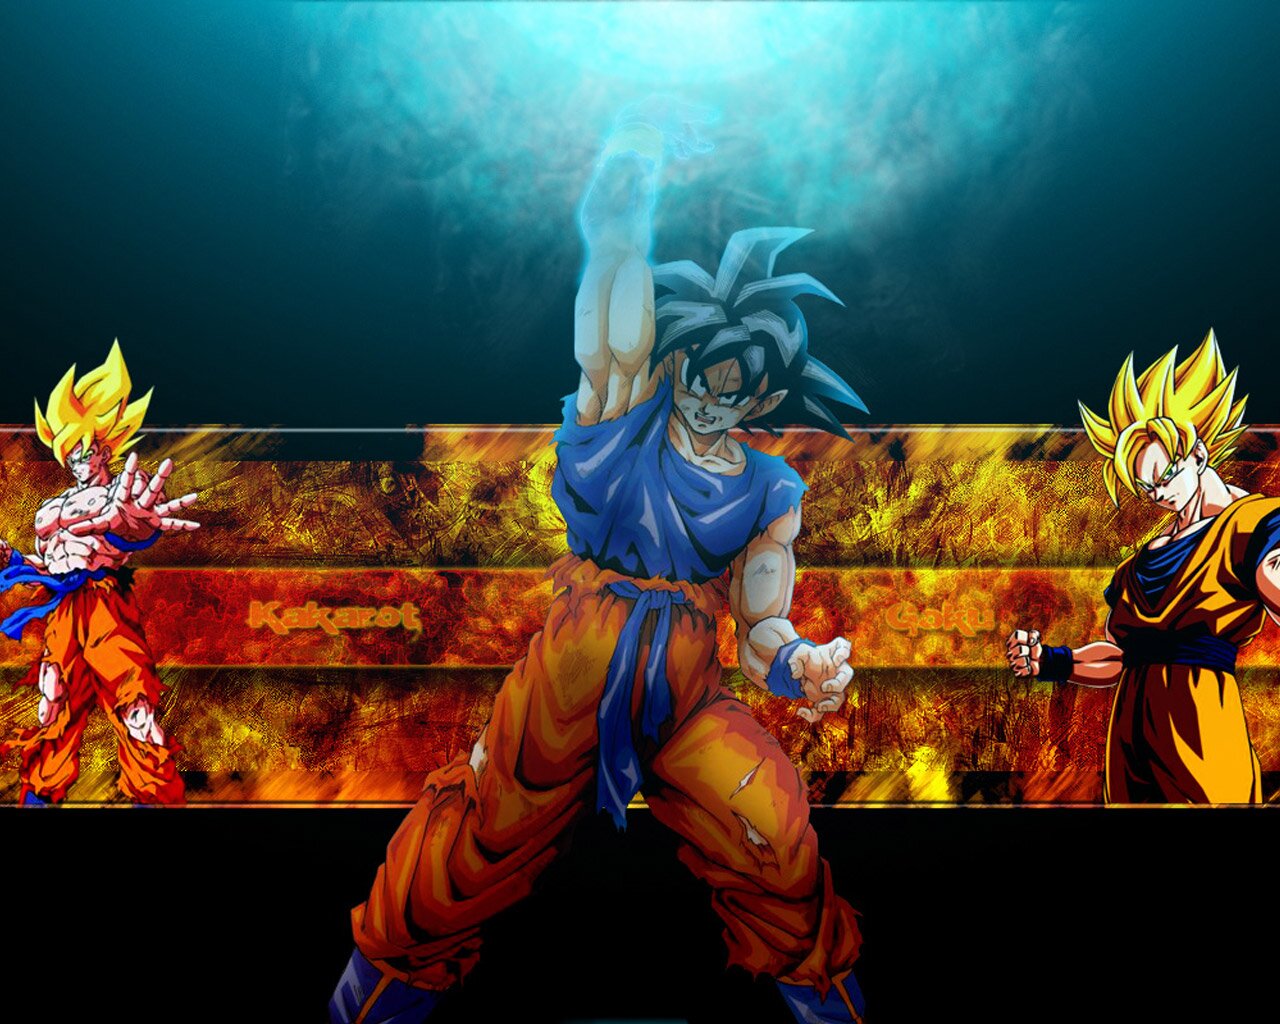 You are viewing the Dragonball Z wallpaper named Goku.